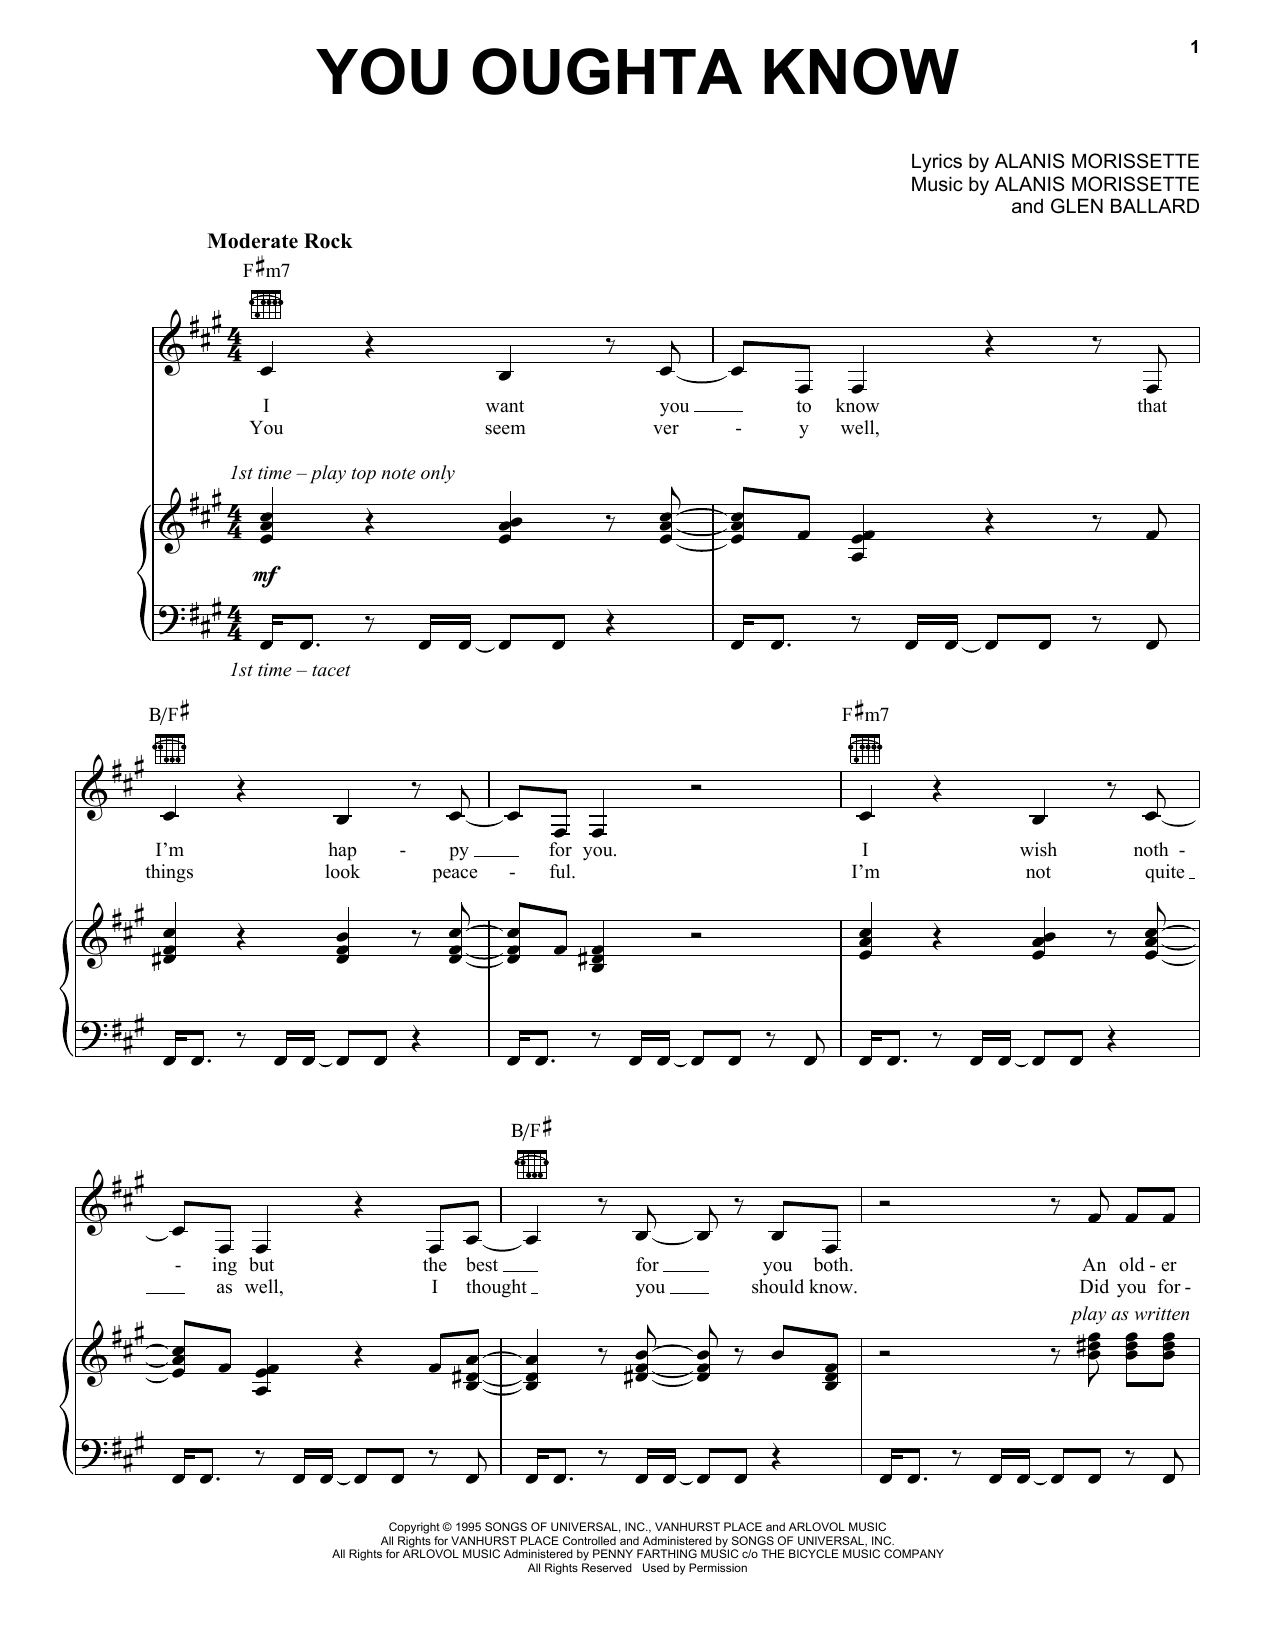 You Oughta Know sheet music